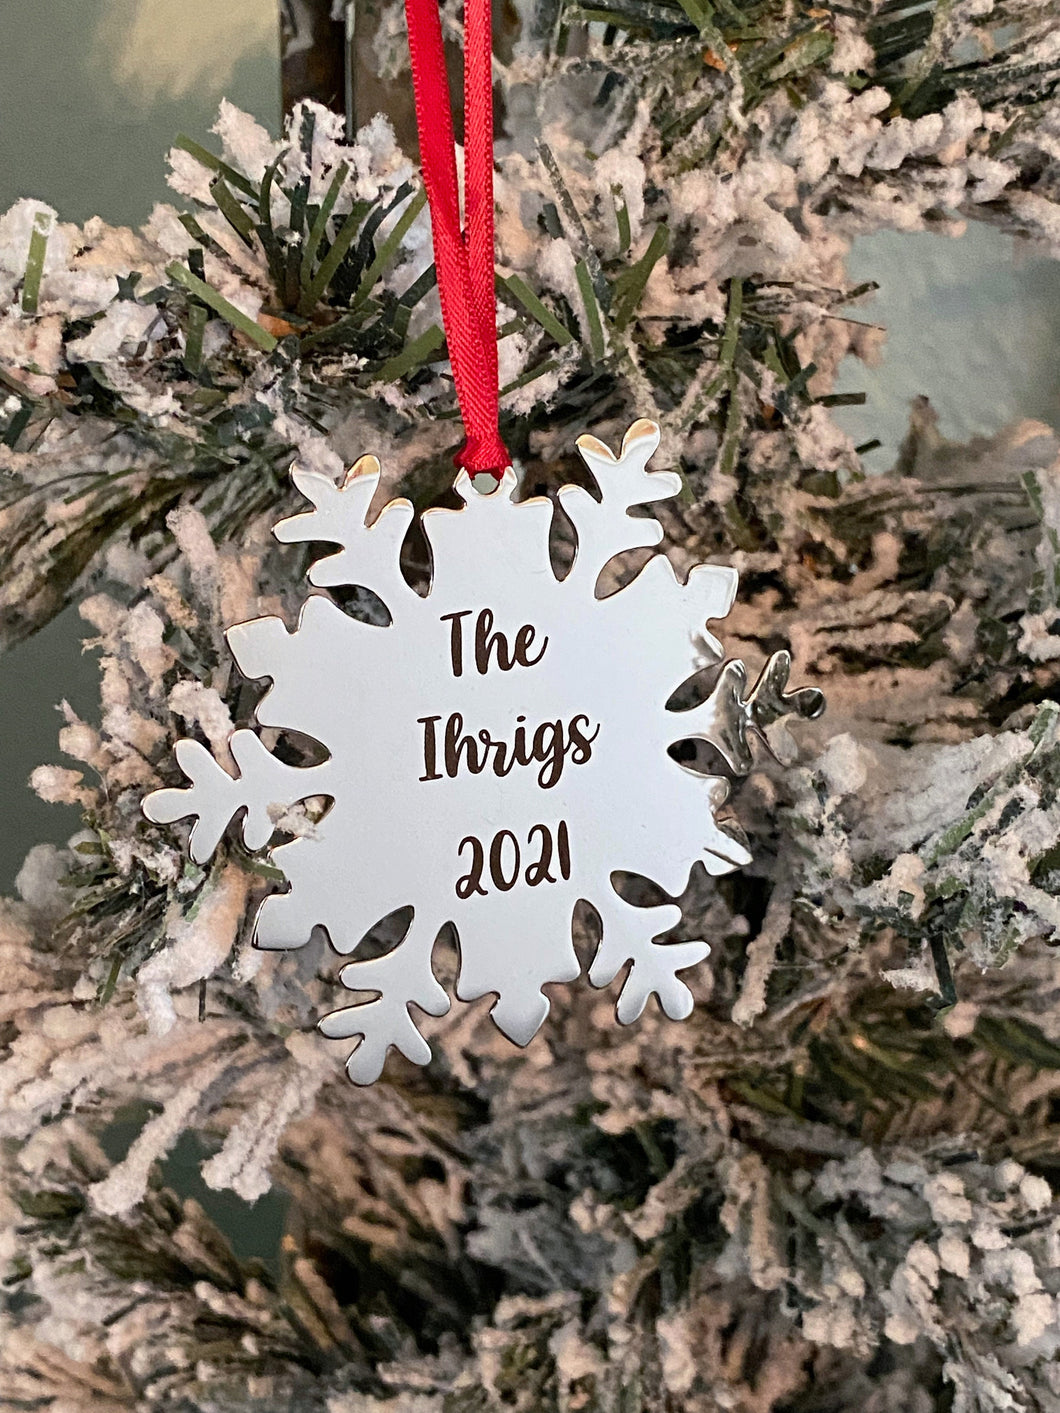 Personalized Snowflake Ornament - Christmas Tree Ornament - Silver Stainless steel - Personalized Year Date and Family Last Name engraved